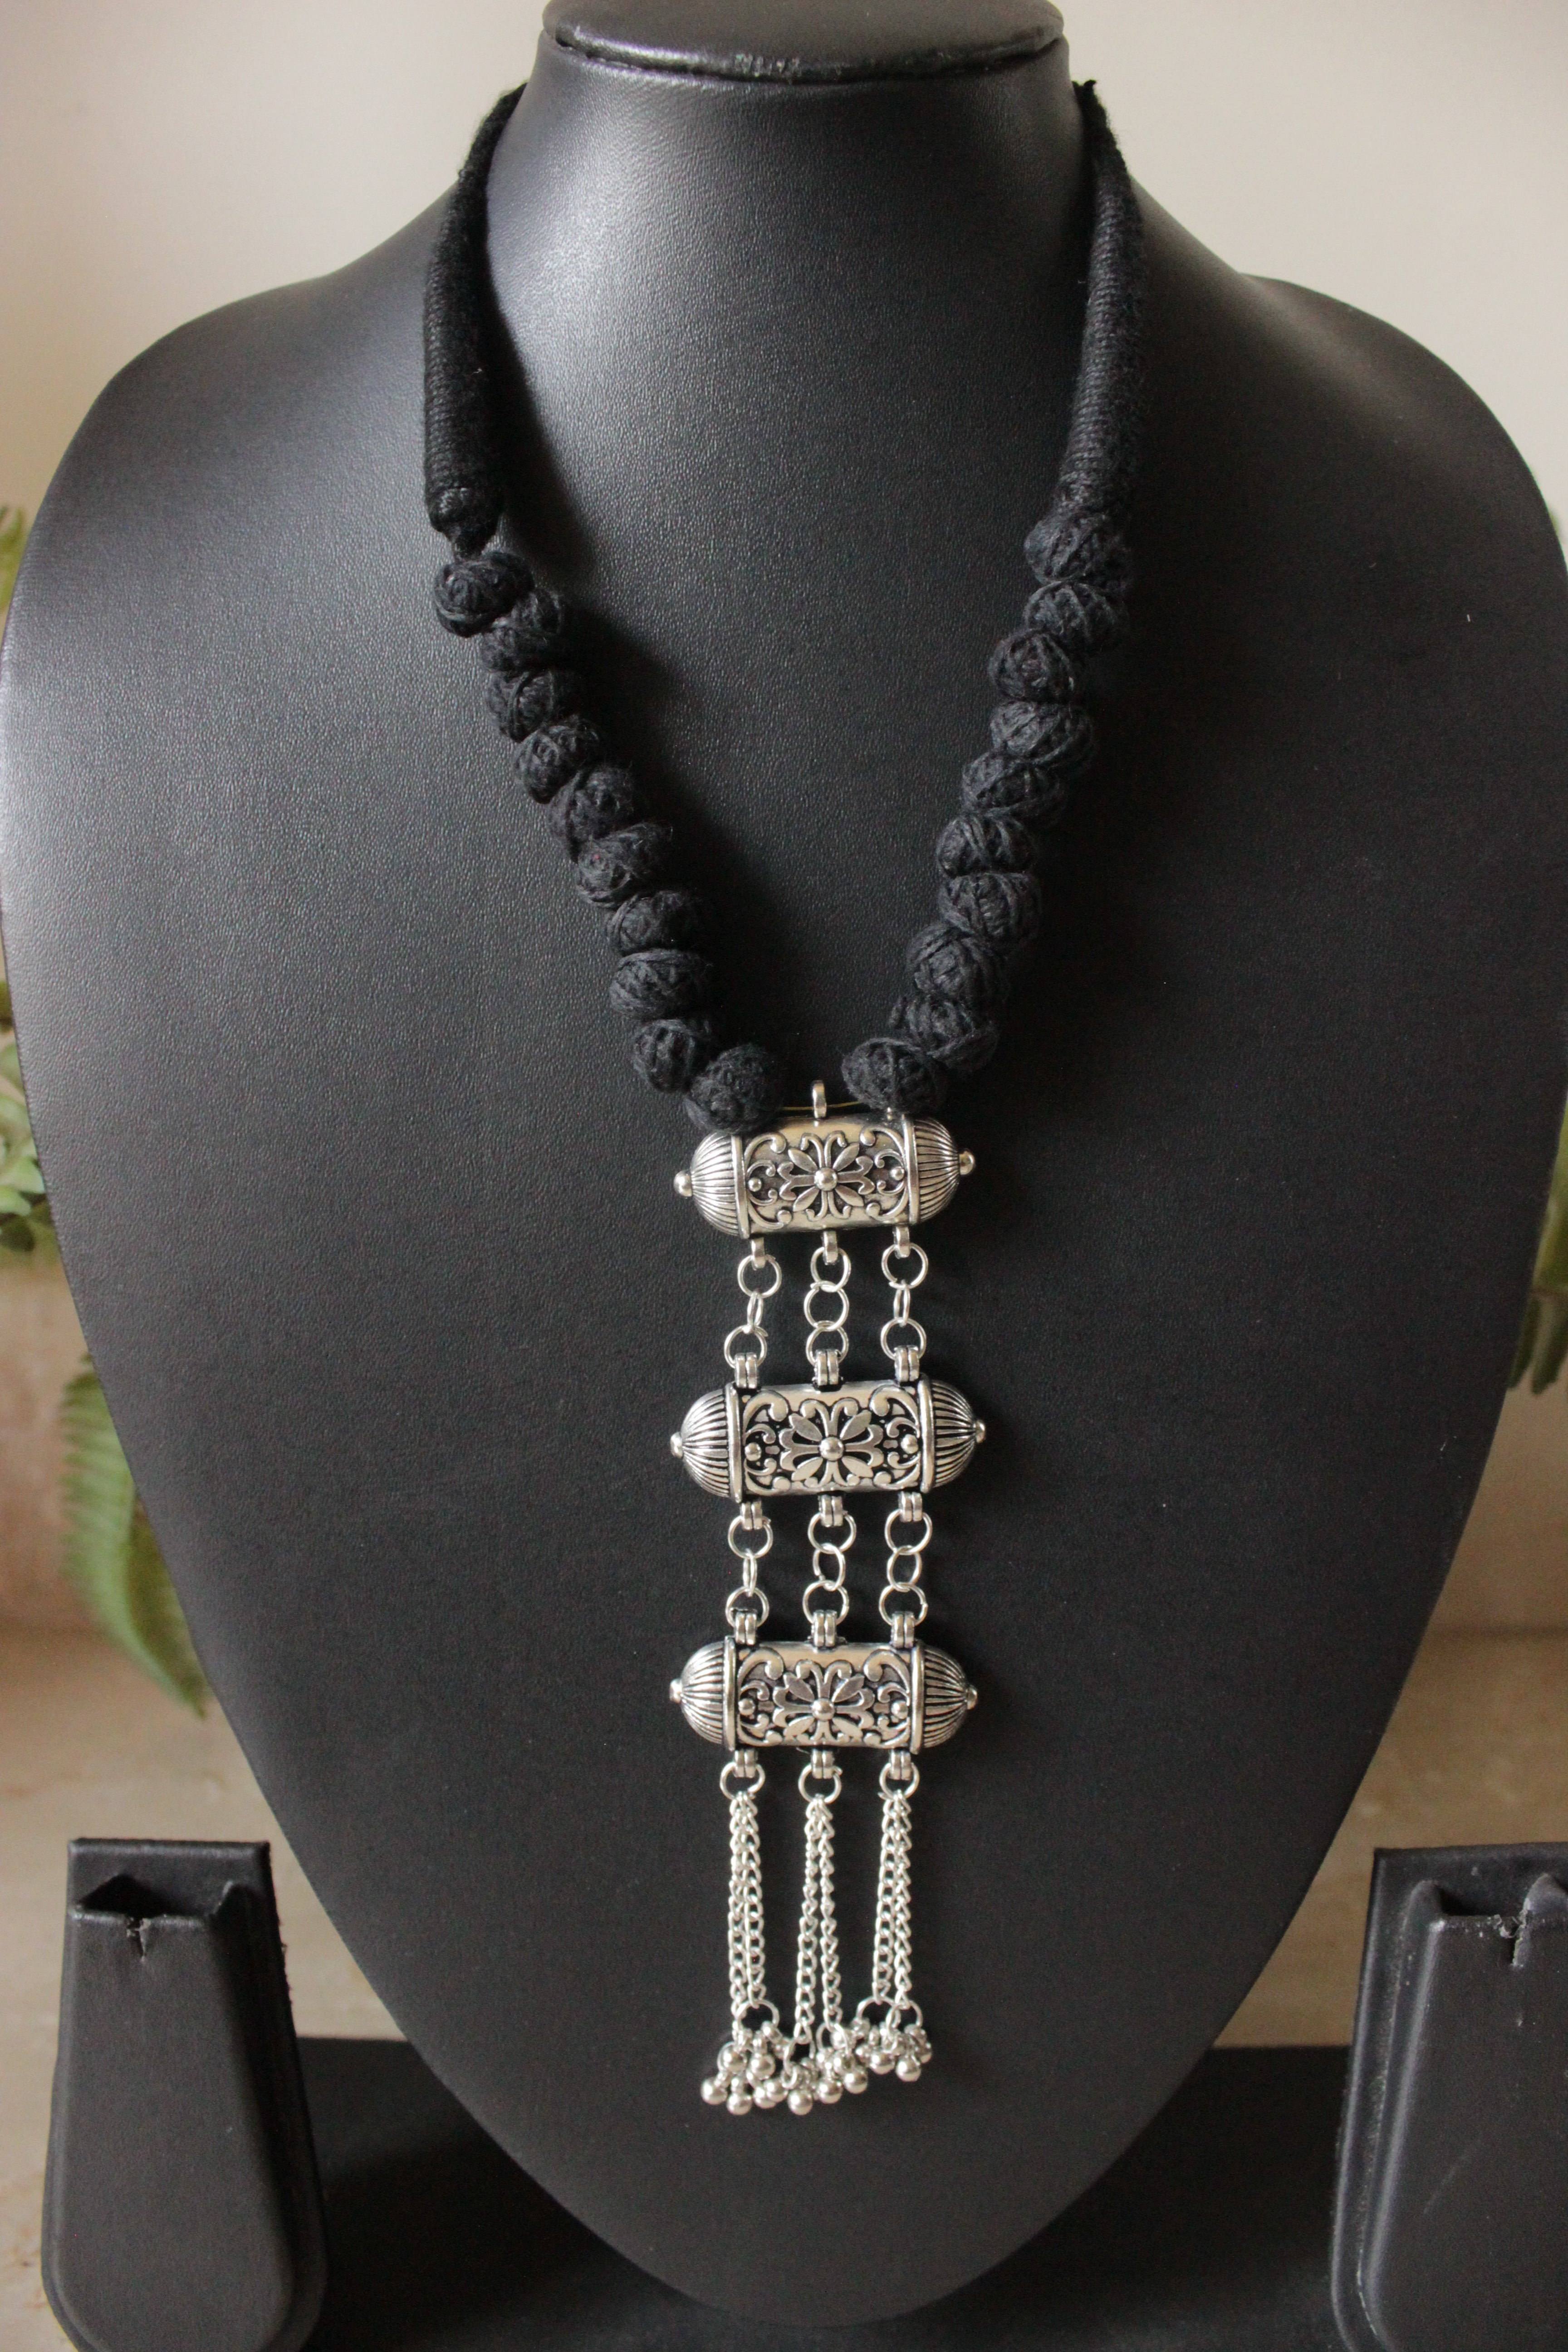 Fabric Threads and Multi Layer Metal Pendant Black Oxidised Choker Necklace with Adjustable Length